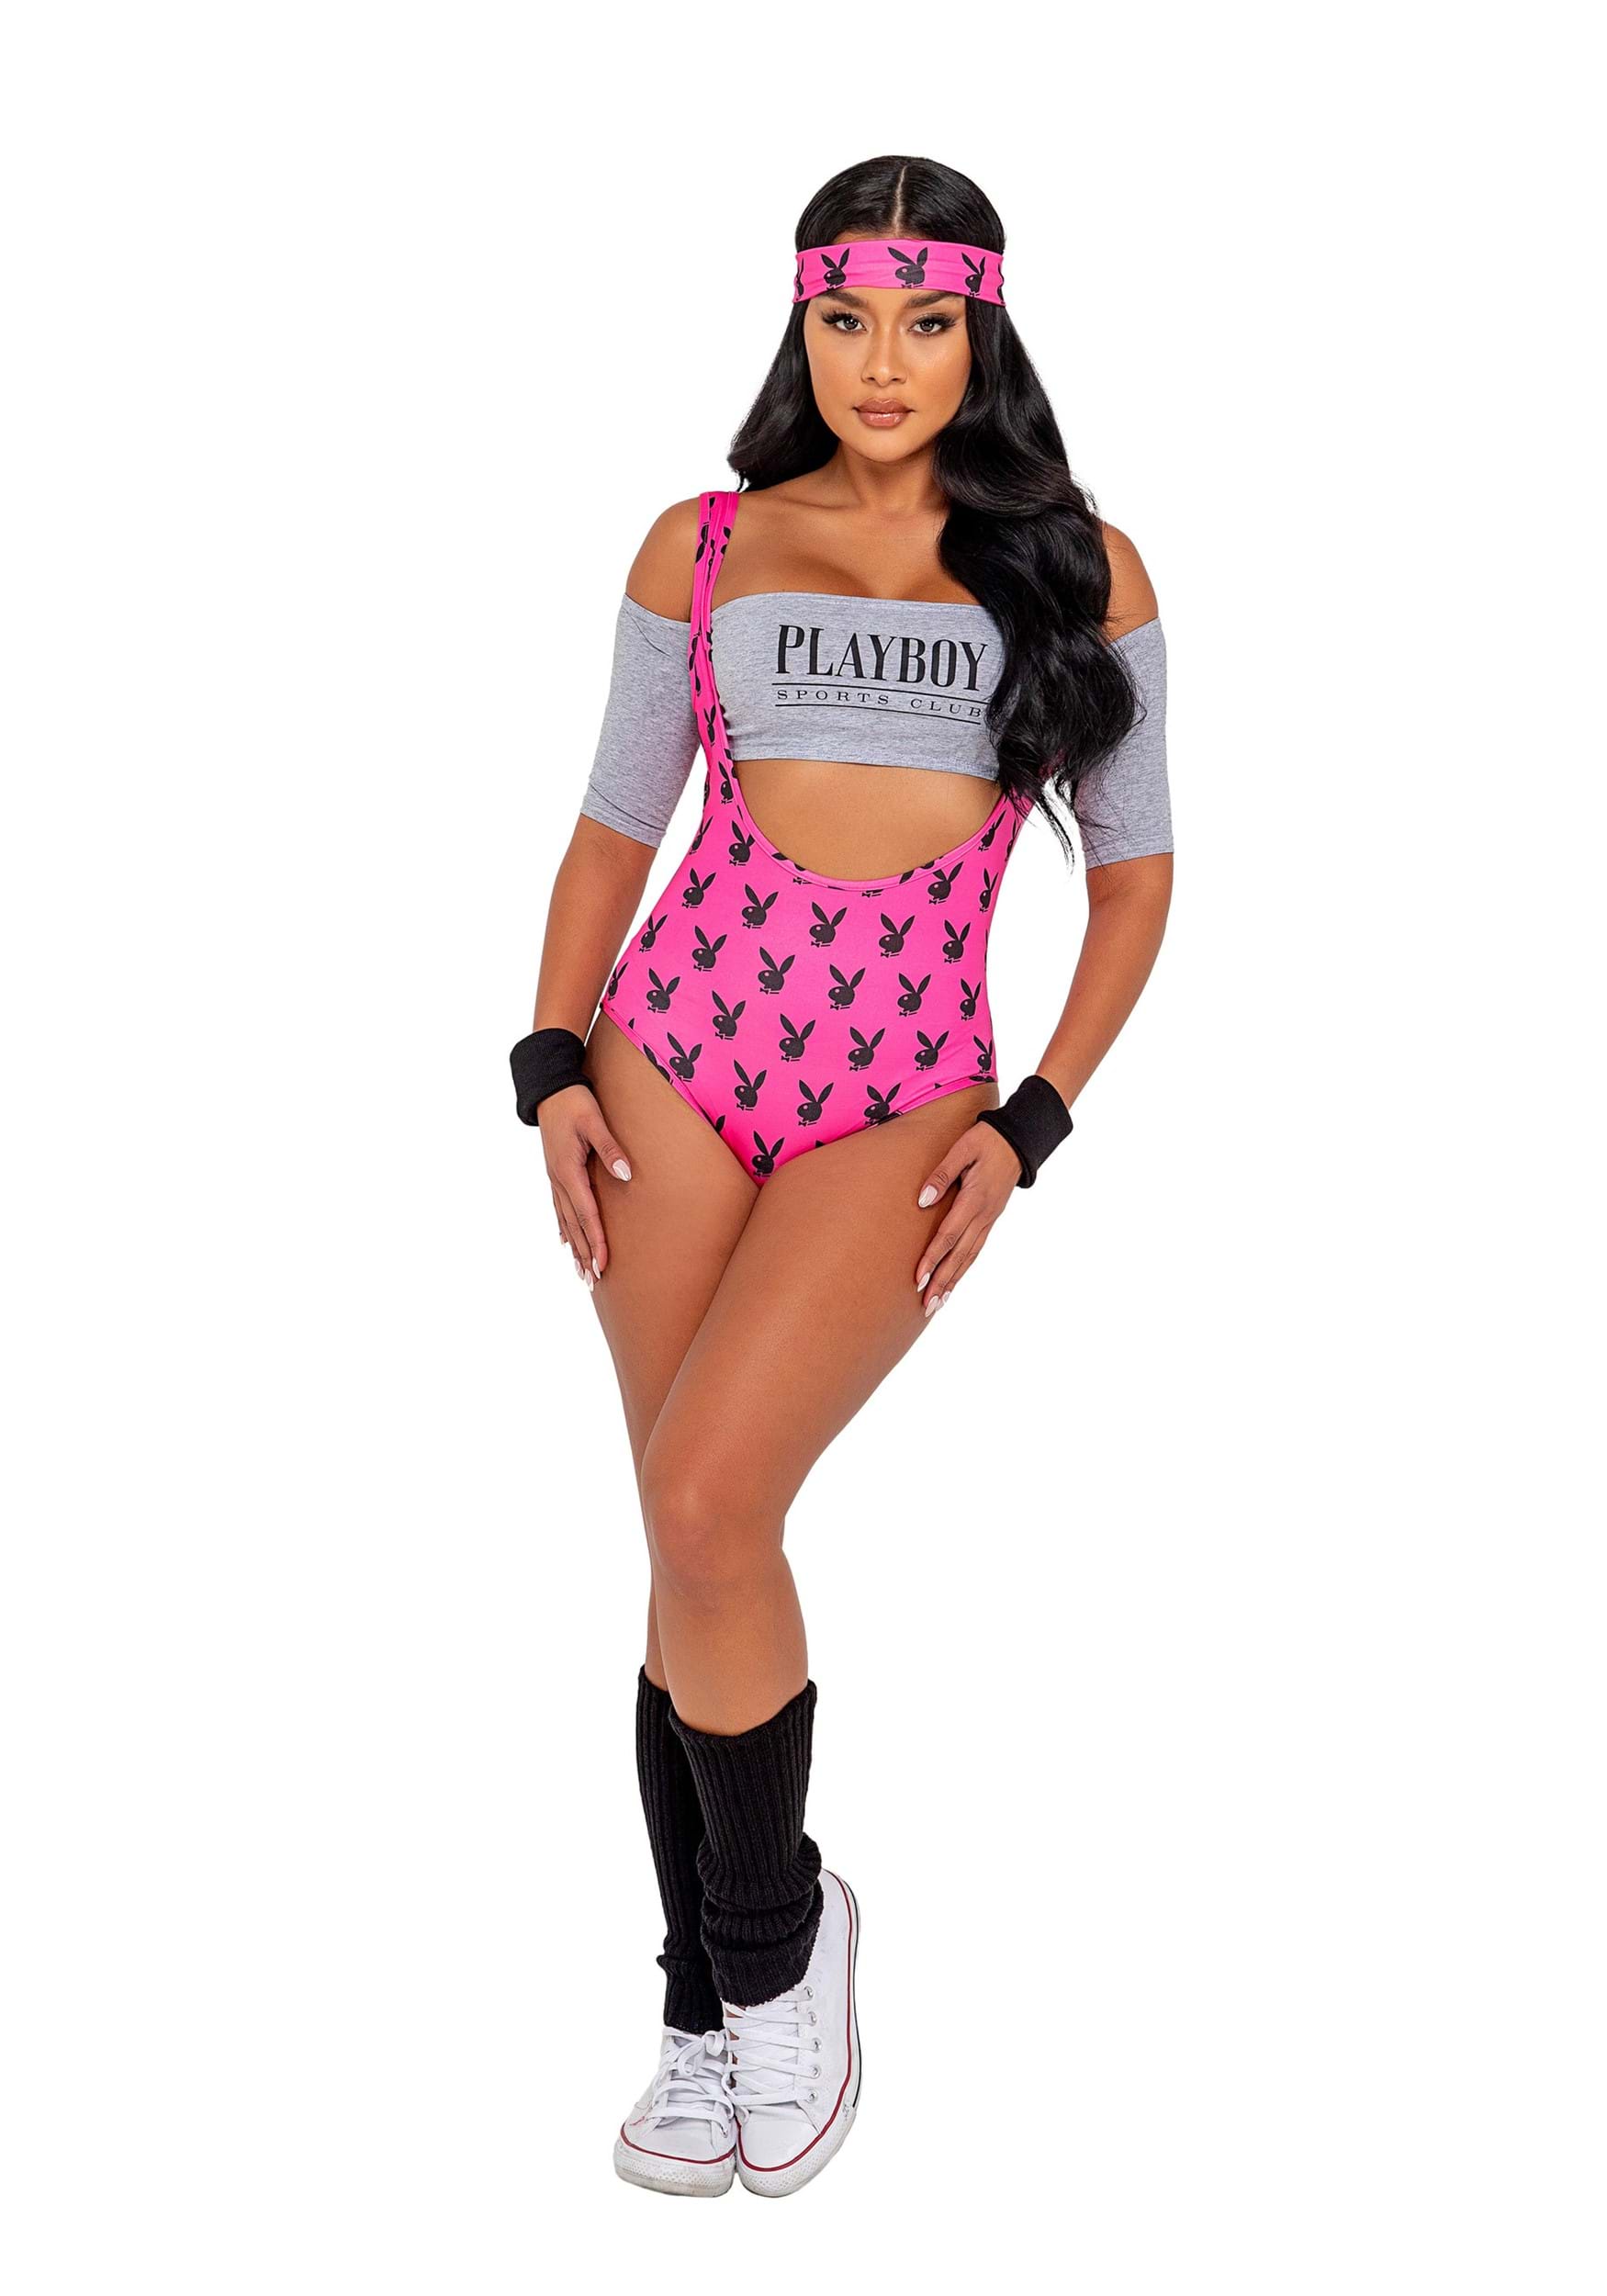 Image of Playboy Retro Physical Costume for Women ID ROPB144-XL